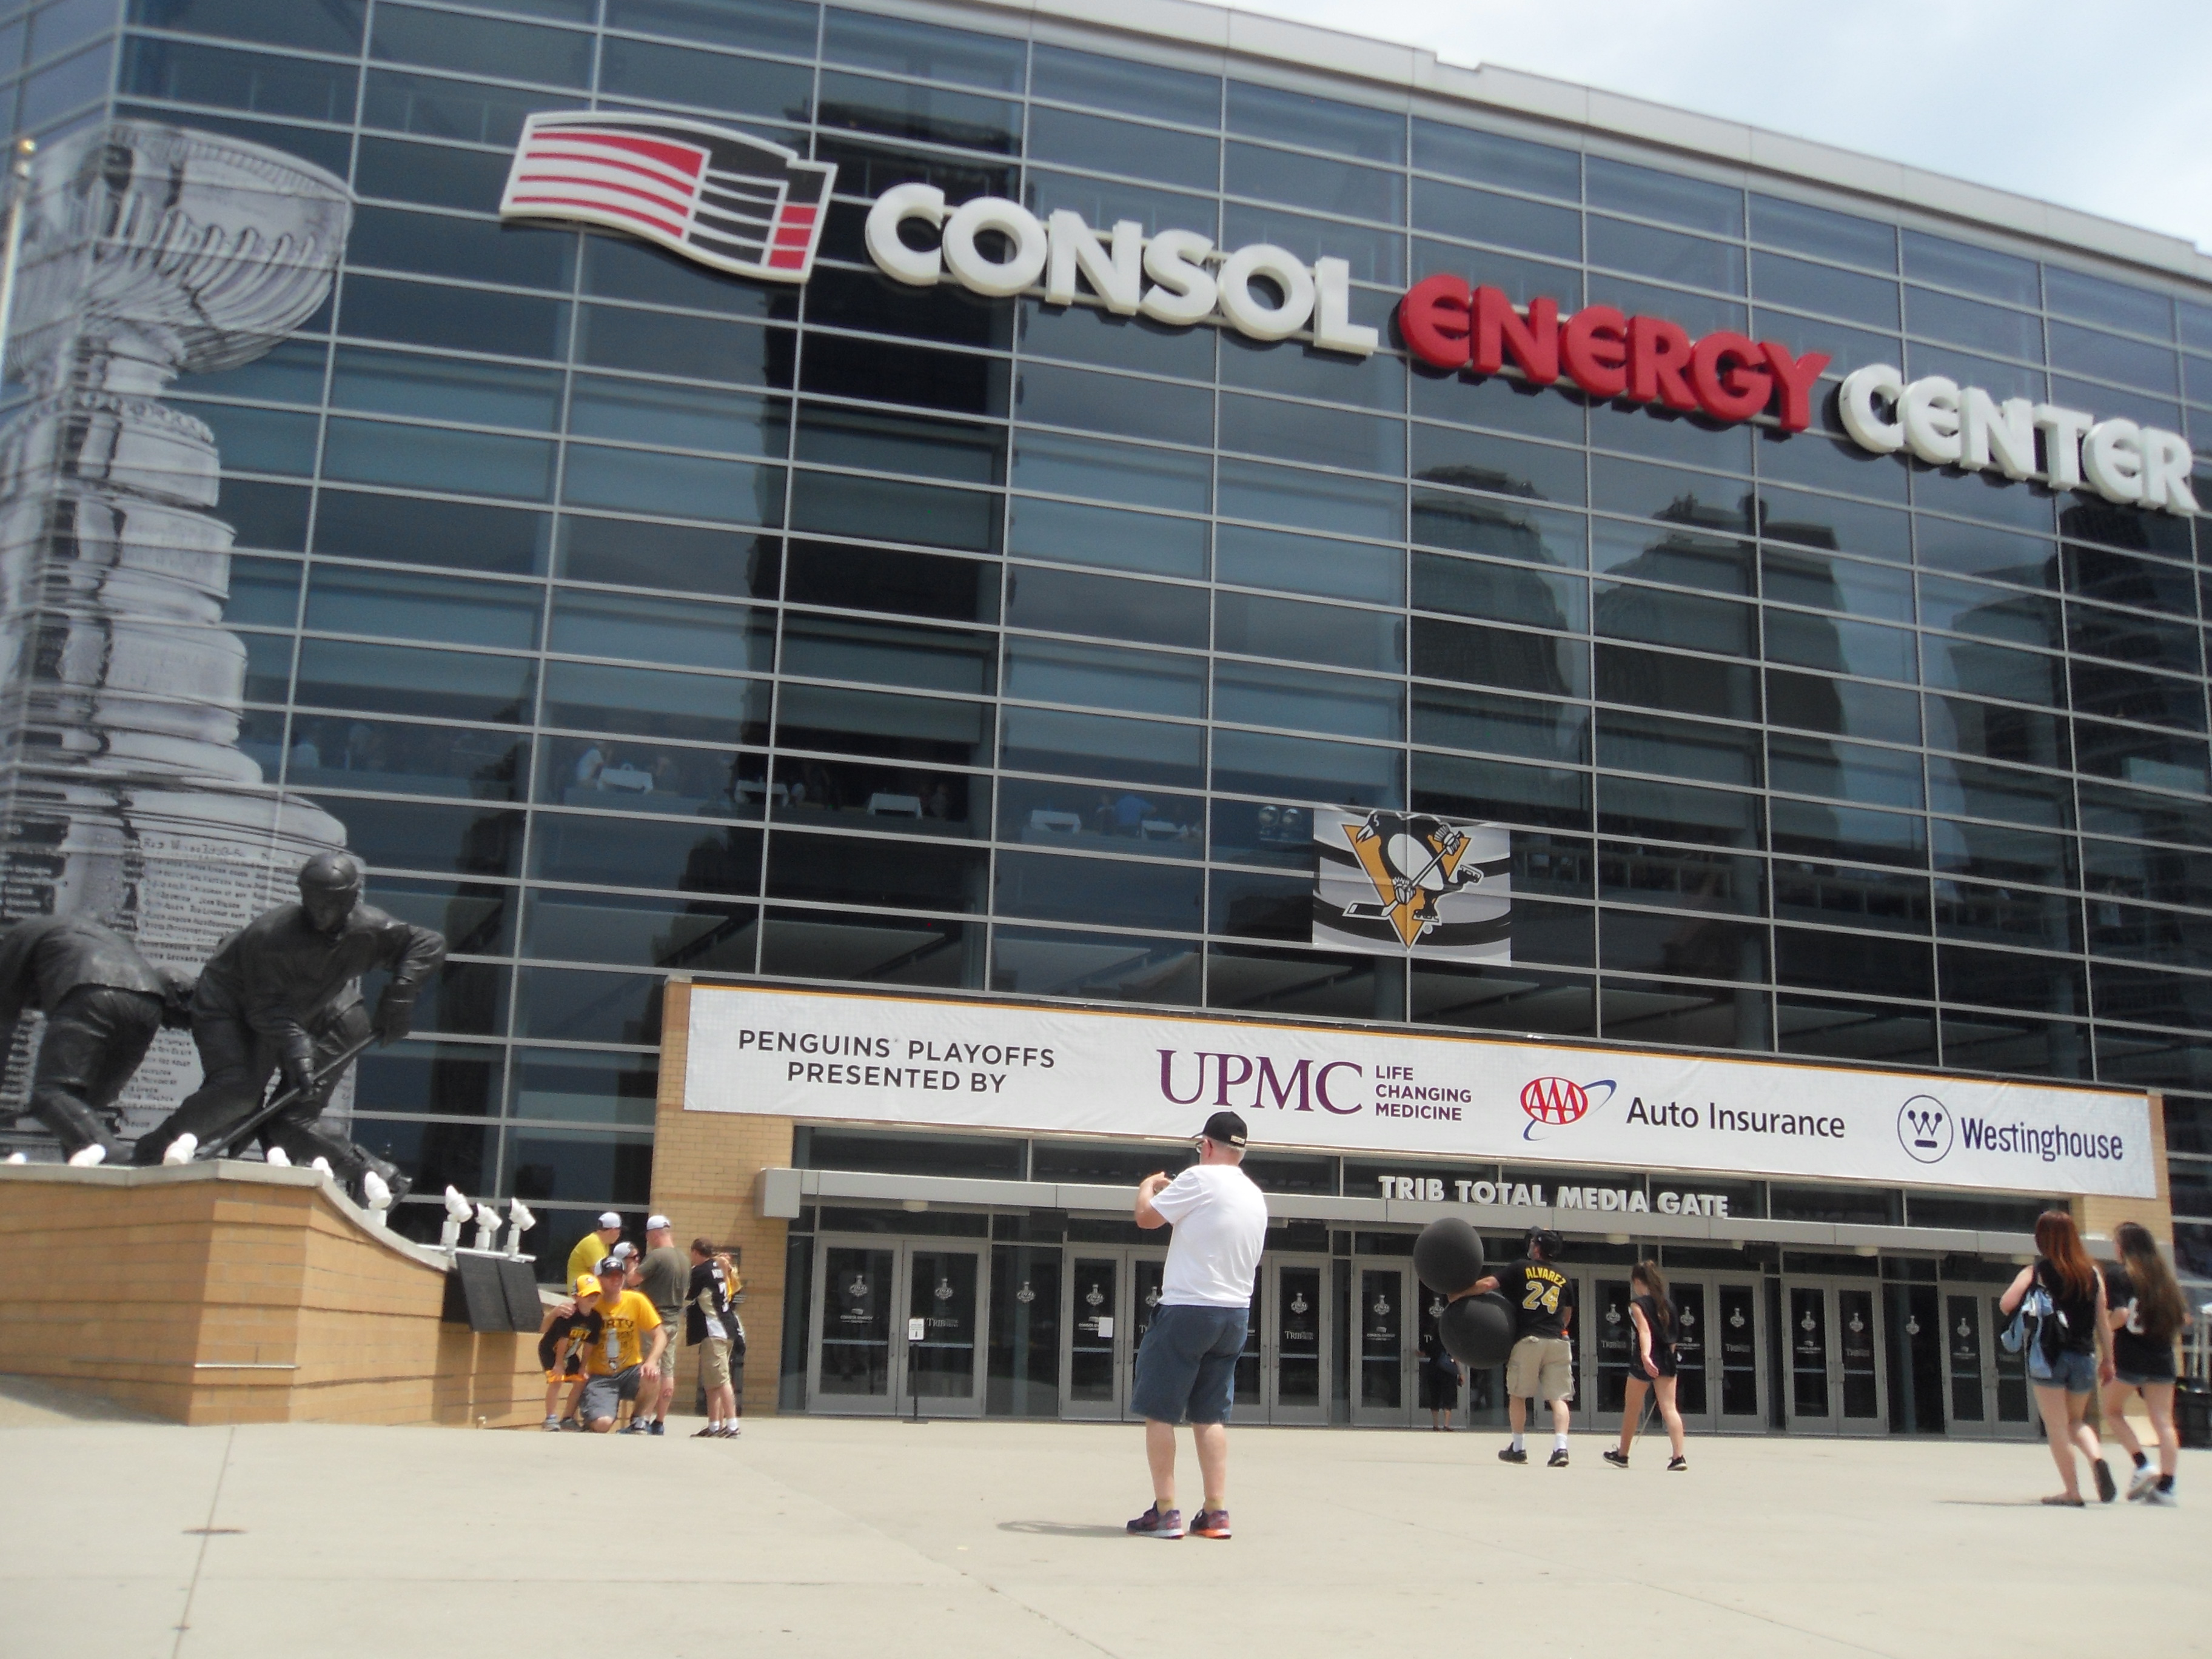 Consol Energy Center: Home of the Penguins